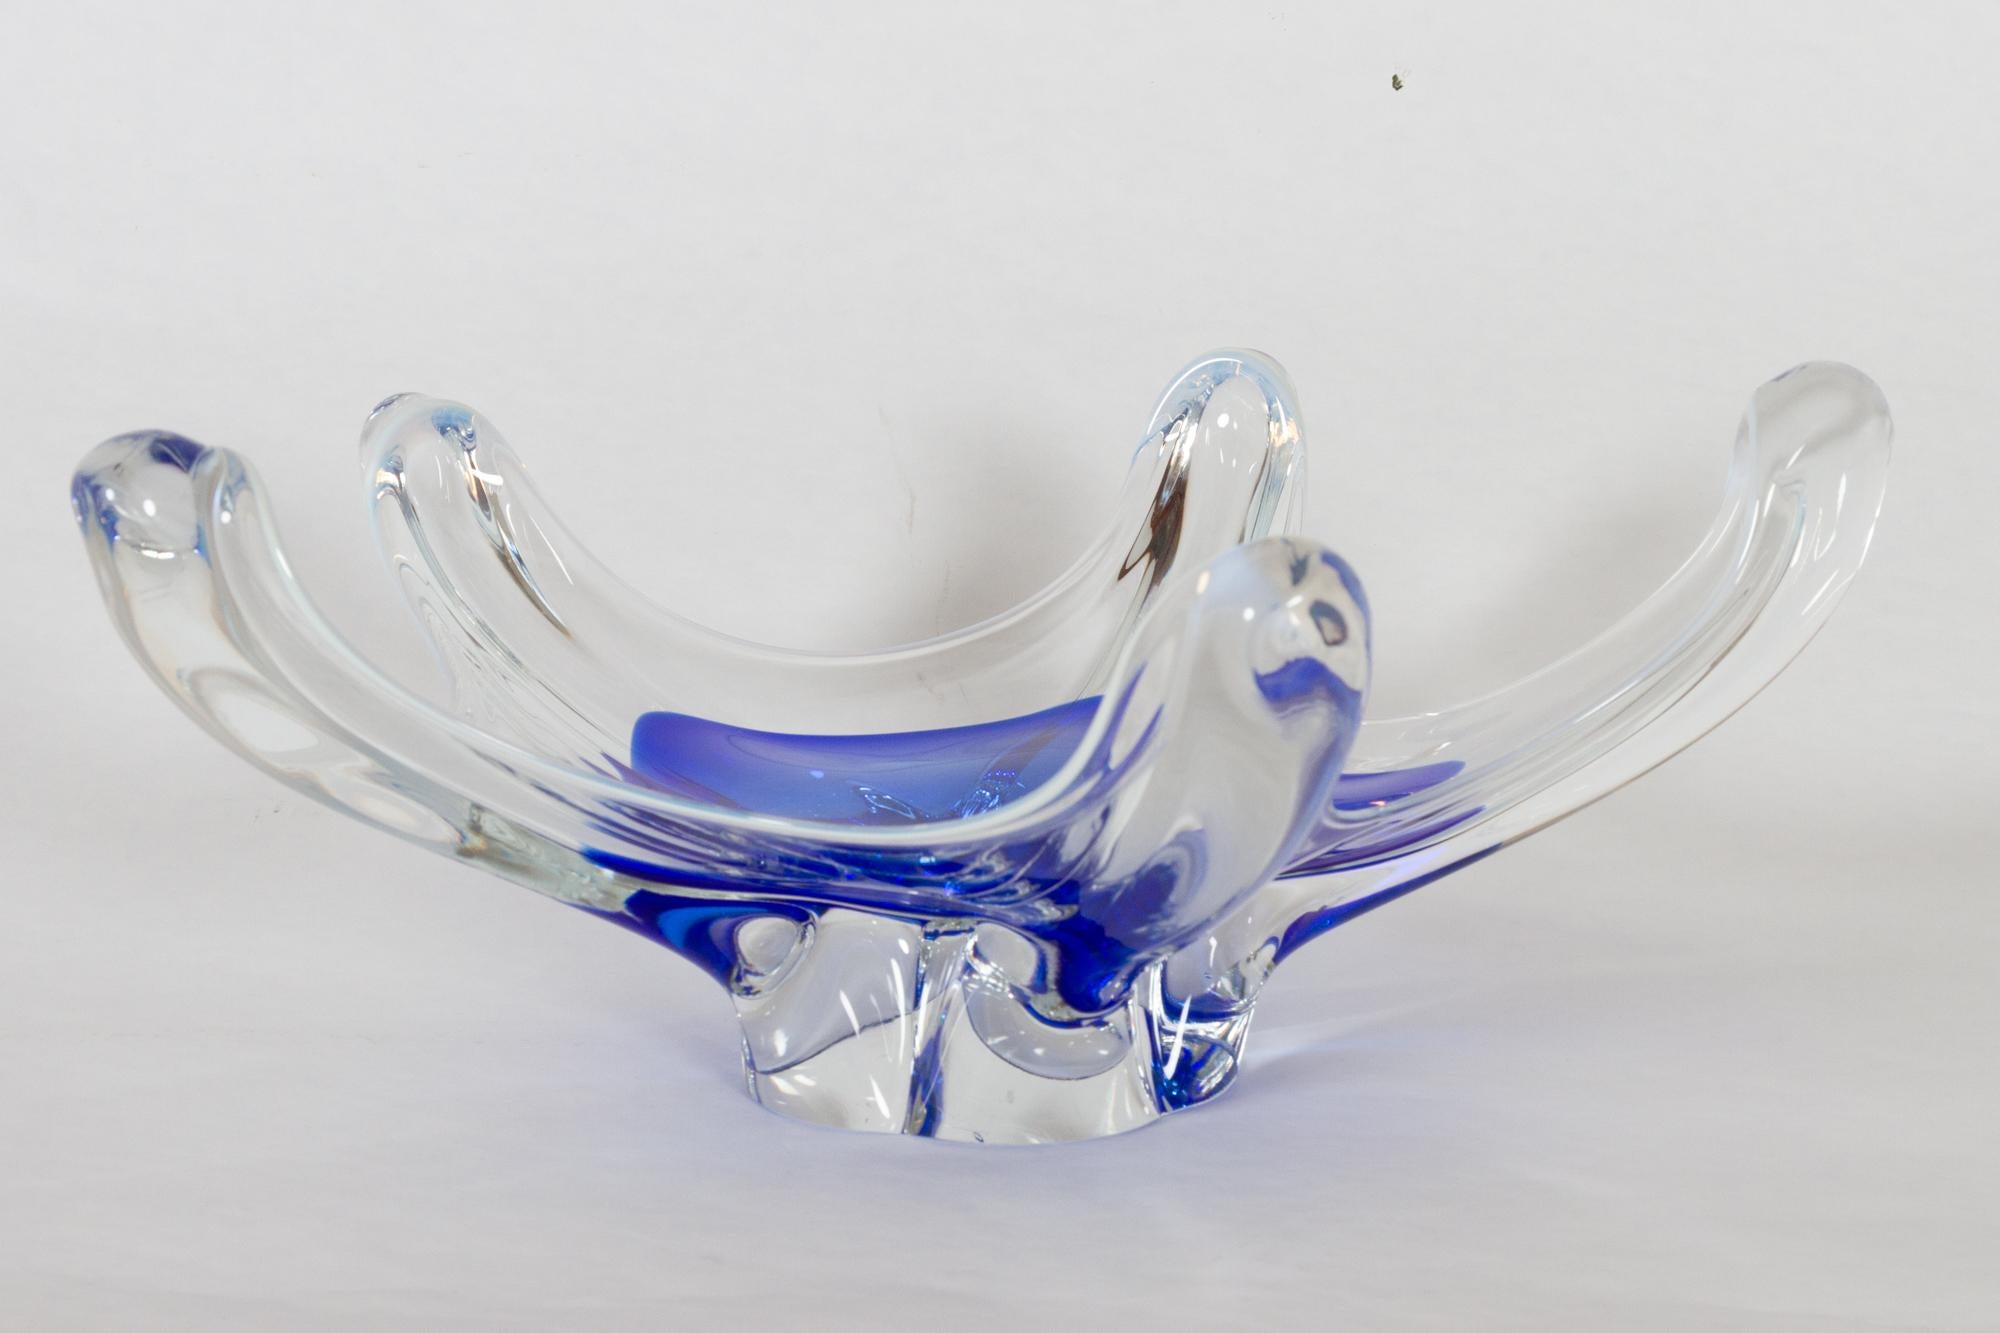 Scandinavian Modern glass bowl, 1950s
Large vintage hand blown two colored centerpiece in blue and clear glass. Five fingers edged with white glass.
Measures: Height 14 cm, diameter 33 cm.
Very good condition, no chips or cracks.